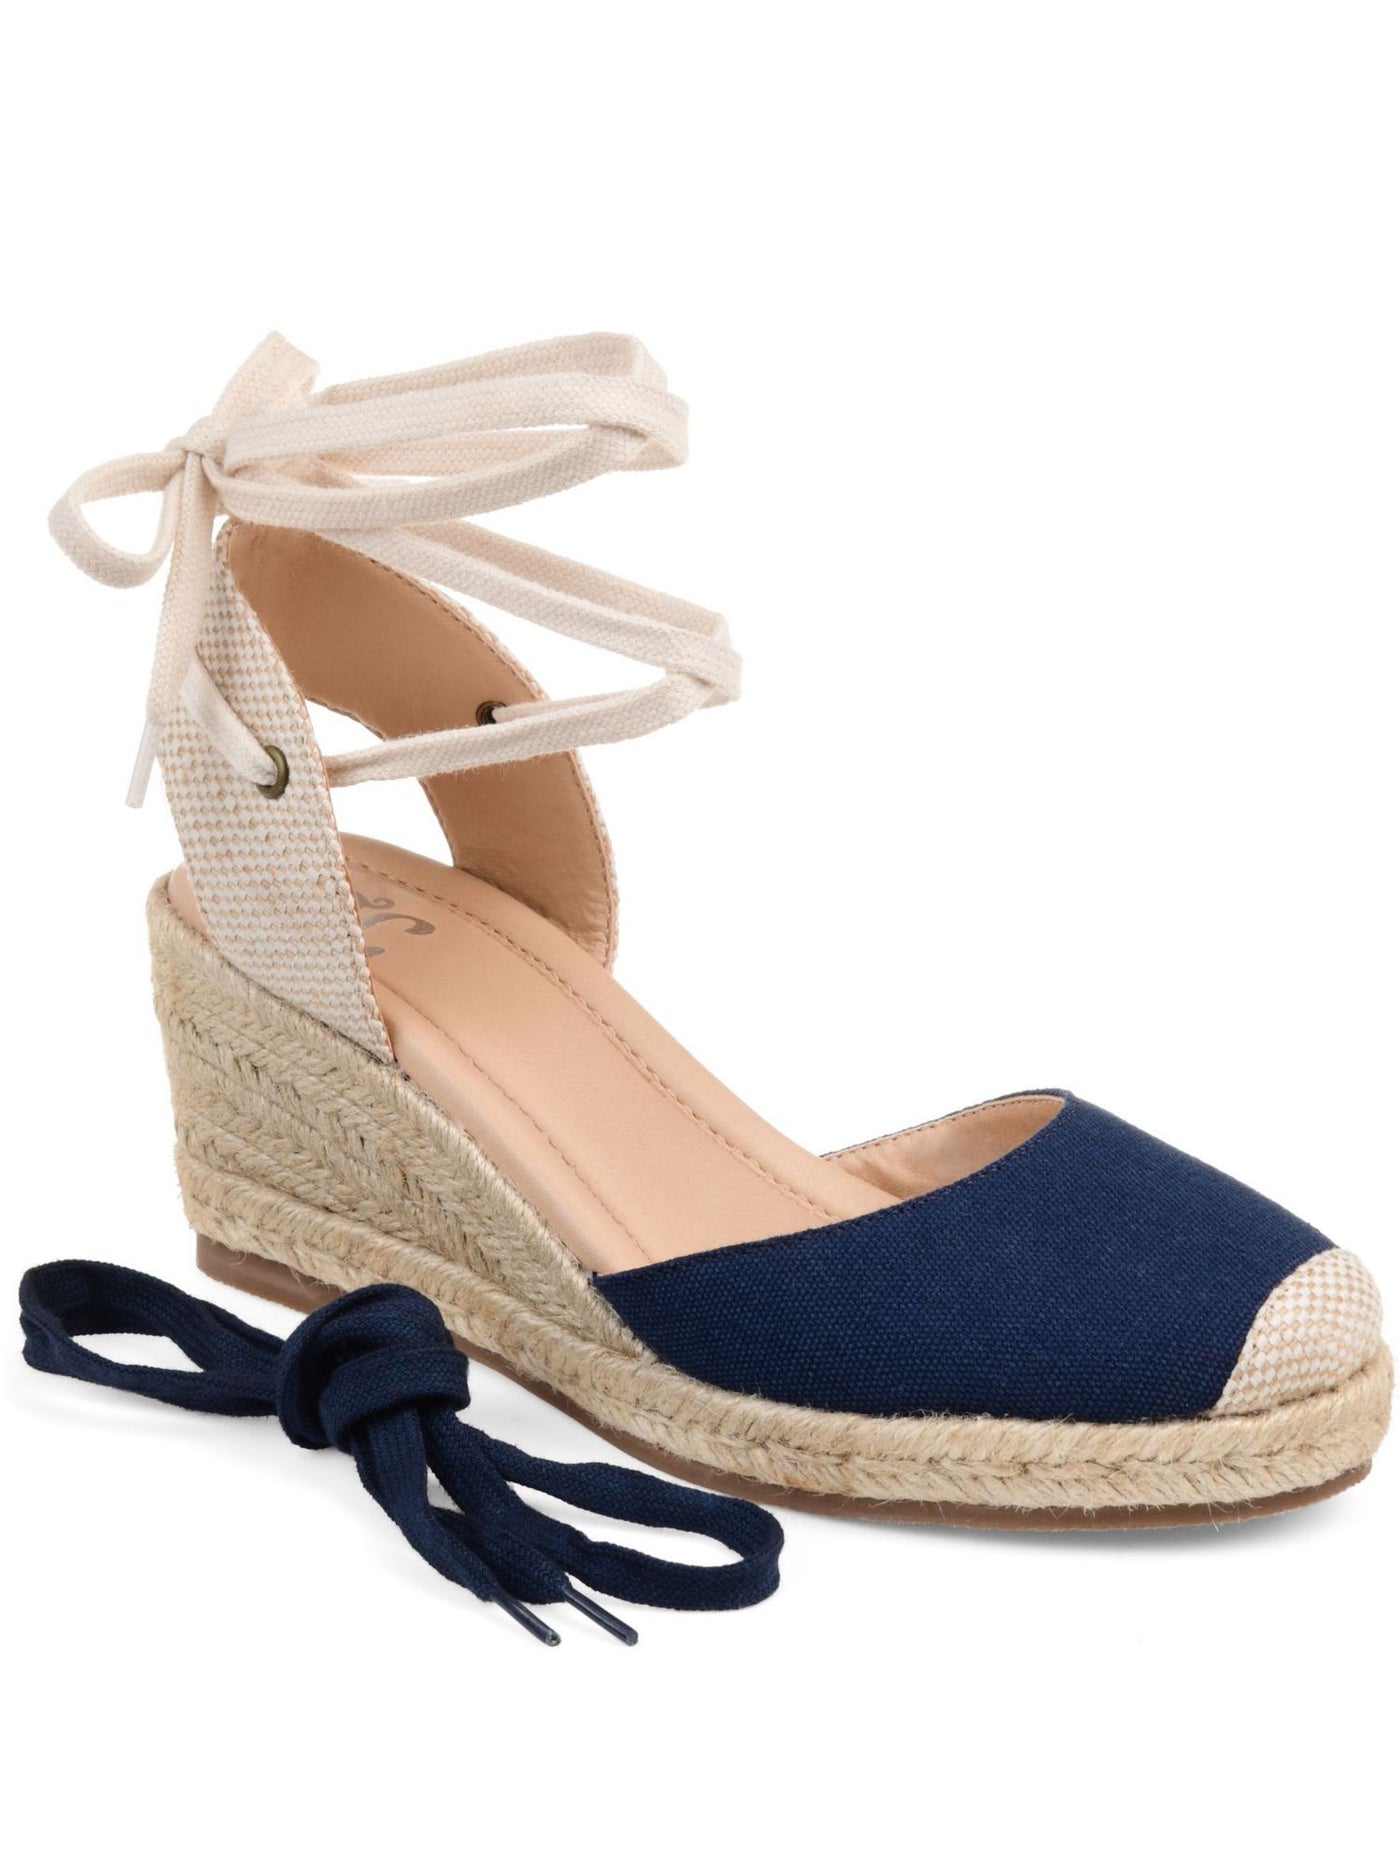 JOURNEE COLLECTION Womens Navy 1/2" Platform Open Back Shoe Padded Monte Round Toe Wedge Lace-Up Espadrille Shoes 10 M